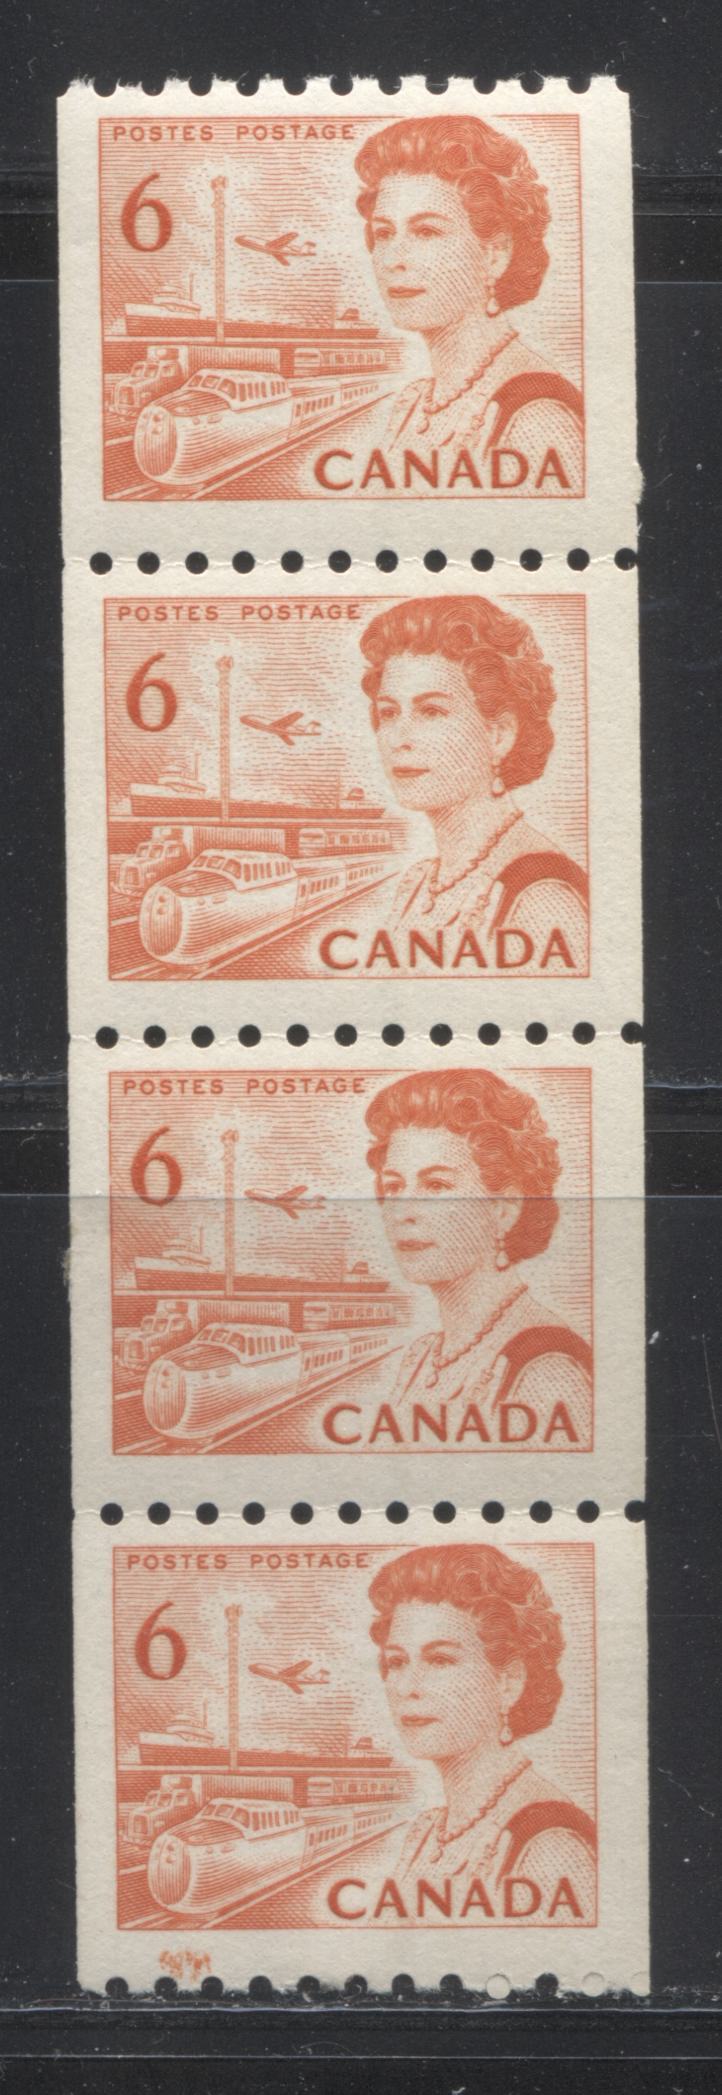 Lot 112 Canada #468A 6c Orange Transportation, 1967-1973 Centennial Definitive Issue, A VFNH/DG Coil Strip Of 4 On DF Grayish Paper With Dex Gum, Ink Smudge On 4th Stamp, Small Gum disturbance on 3rd Stamp